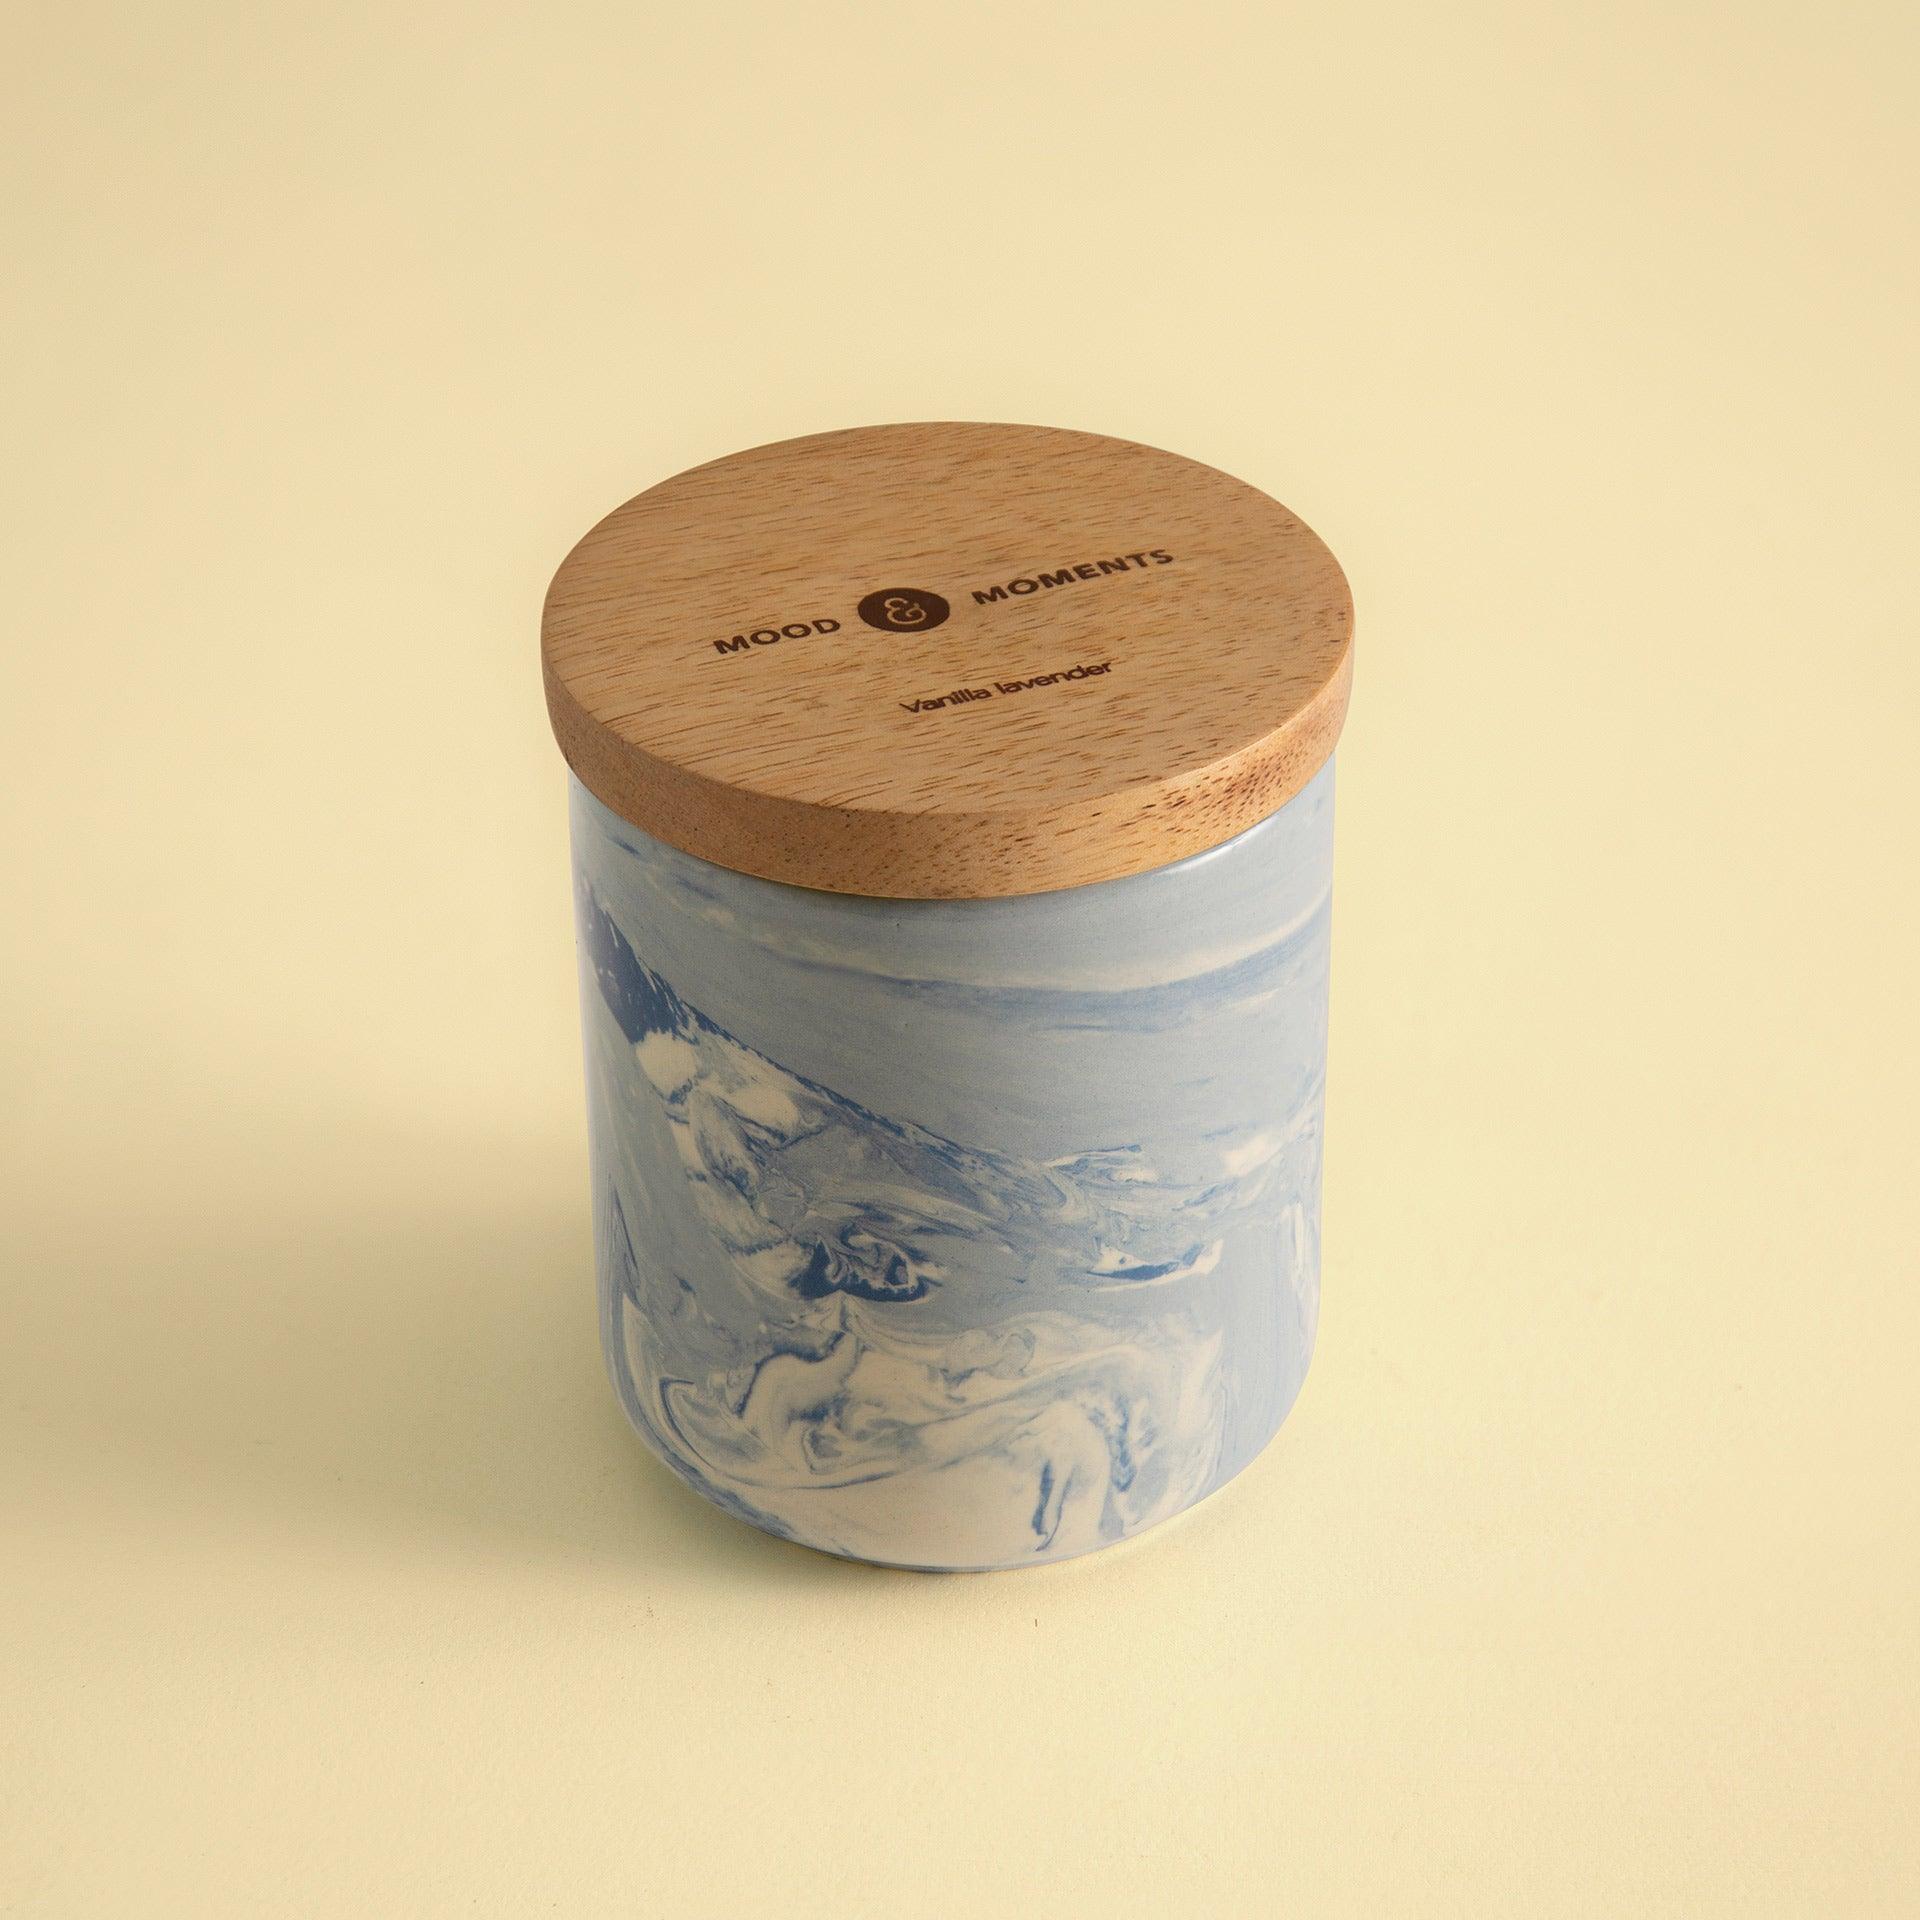 Vanilla & Lavender Natural Soy Wax Ceramic Jar with Wooden Lid (1 Wick)